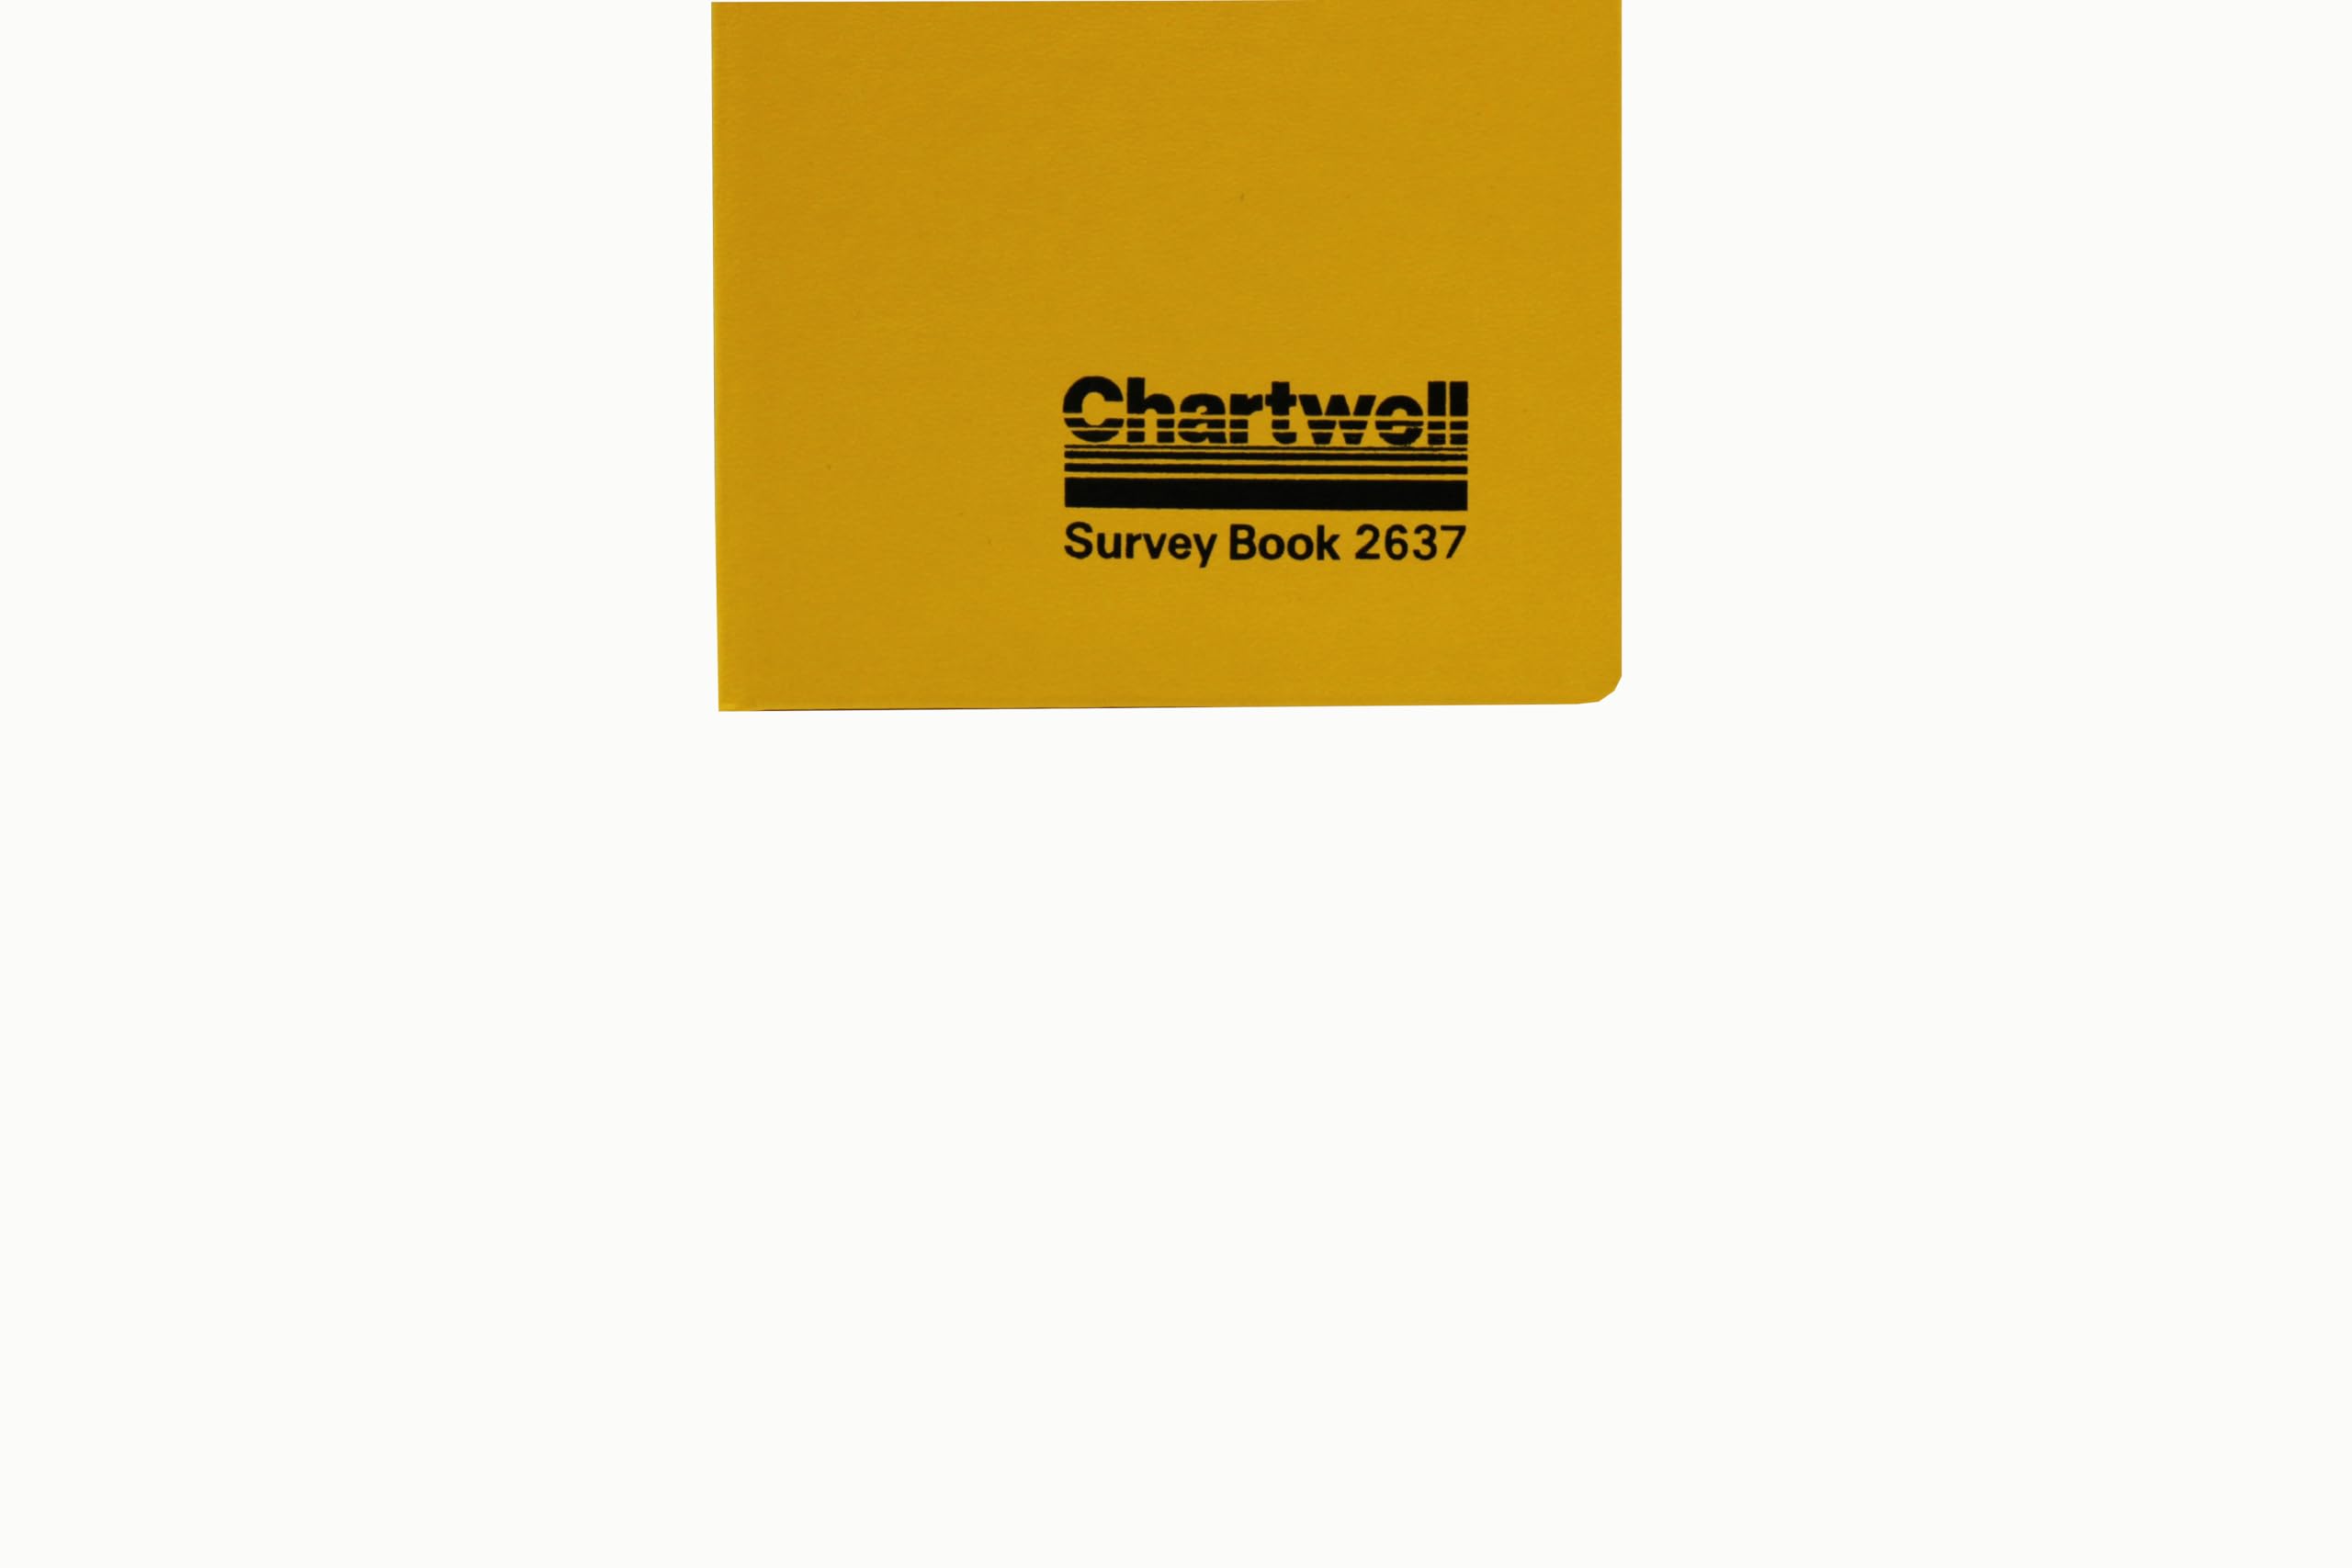 Exacompta - Ref 2637Z - Chartwell - Mining Transit Casebound Survey Book - 192 x 120mm in Size - Suitable for Use Outdoors & in Wet Conditions - Yellow